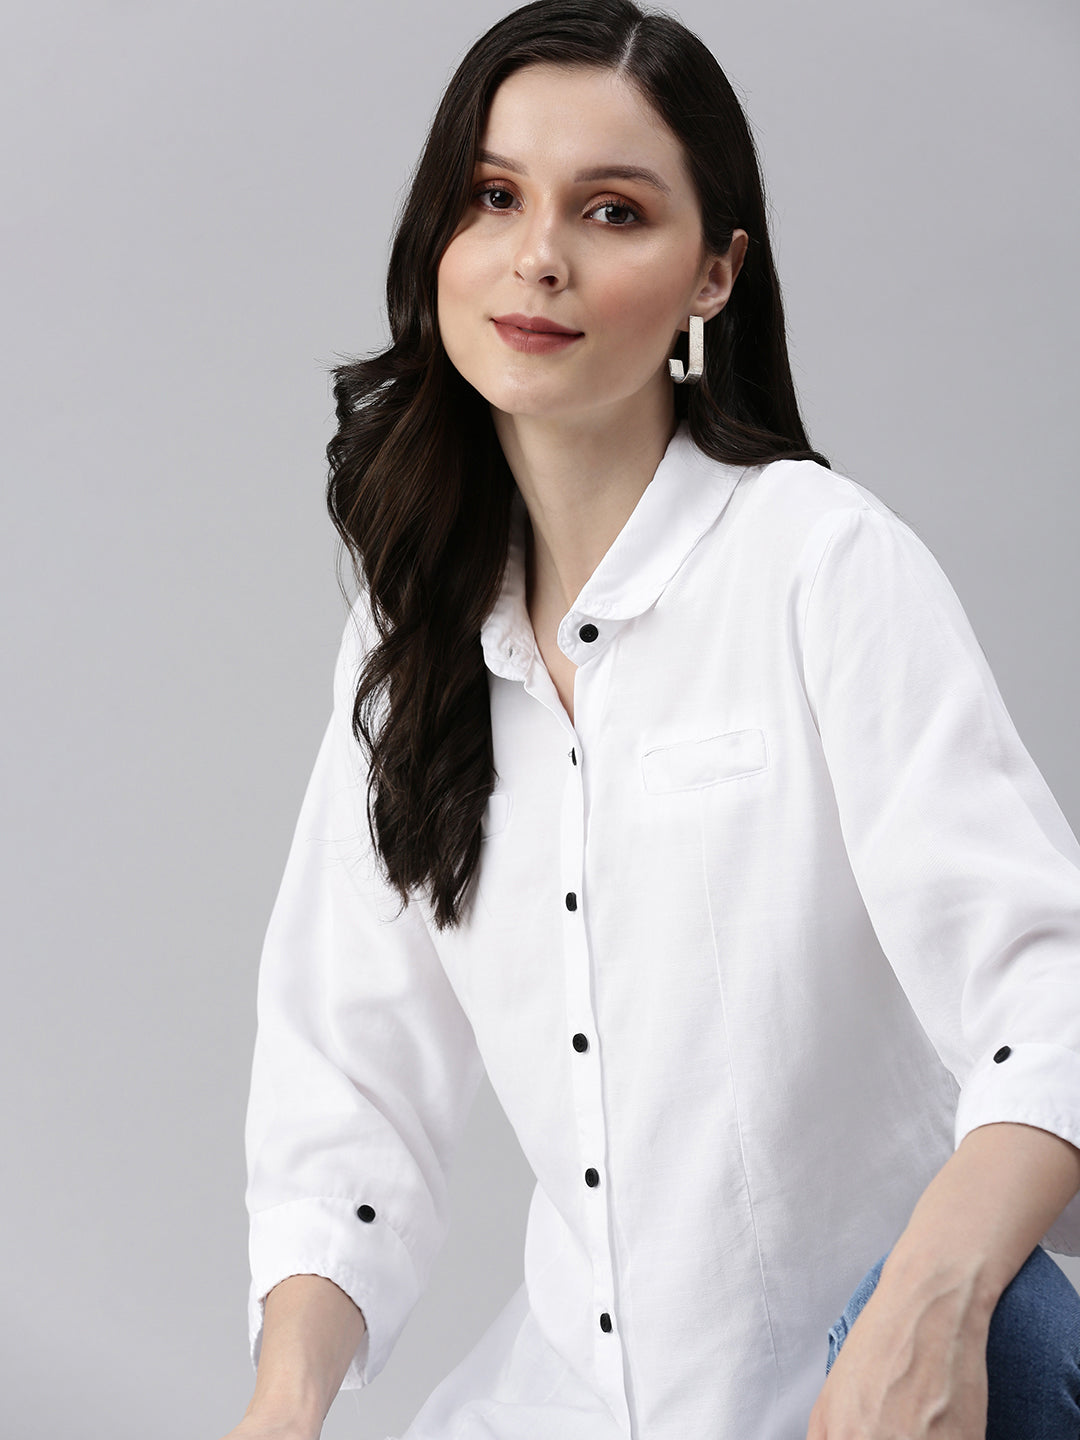 Women's White Solid Casual Shirts